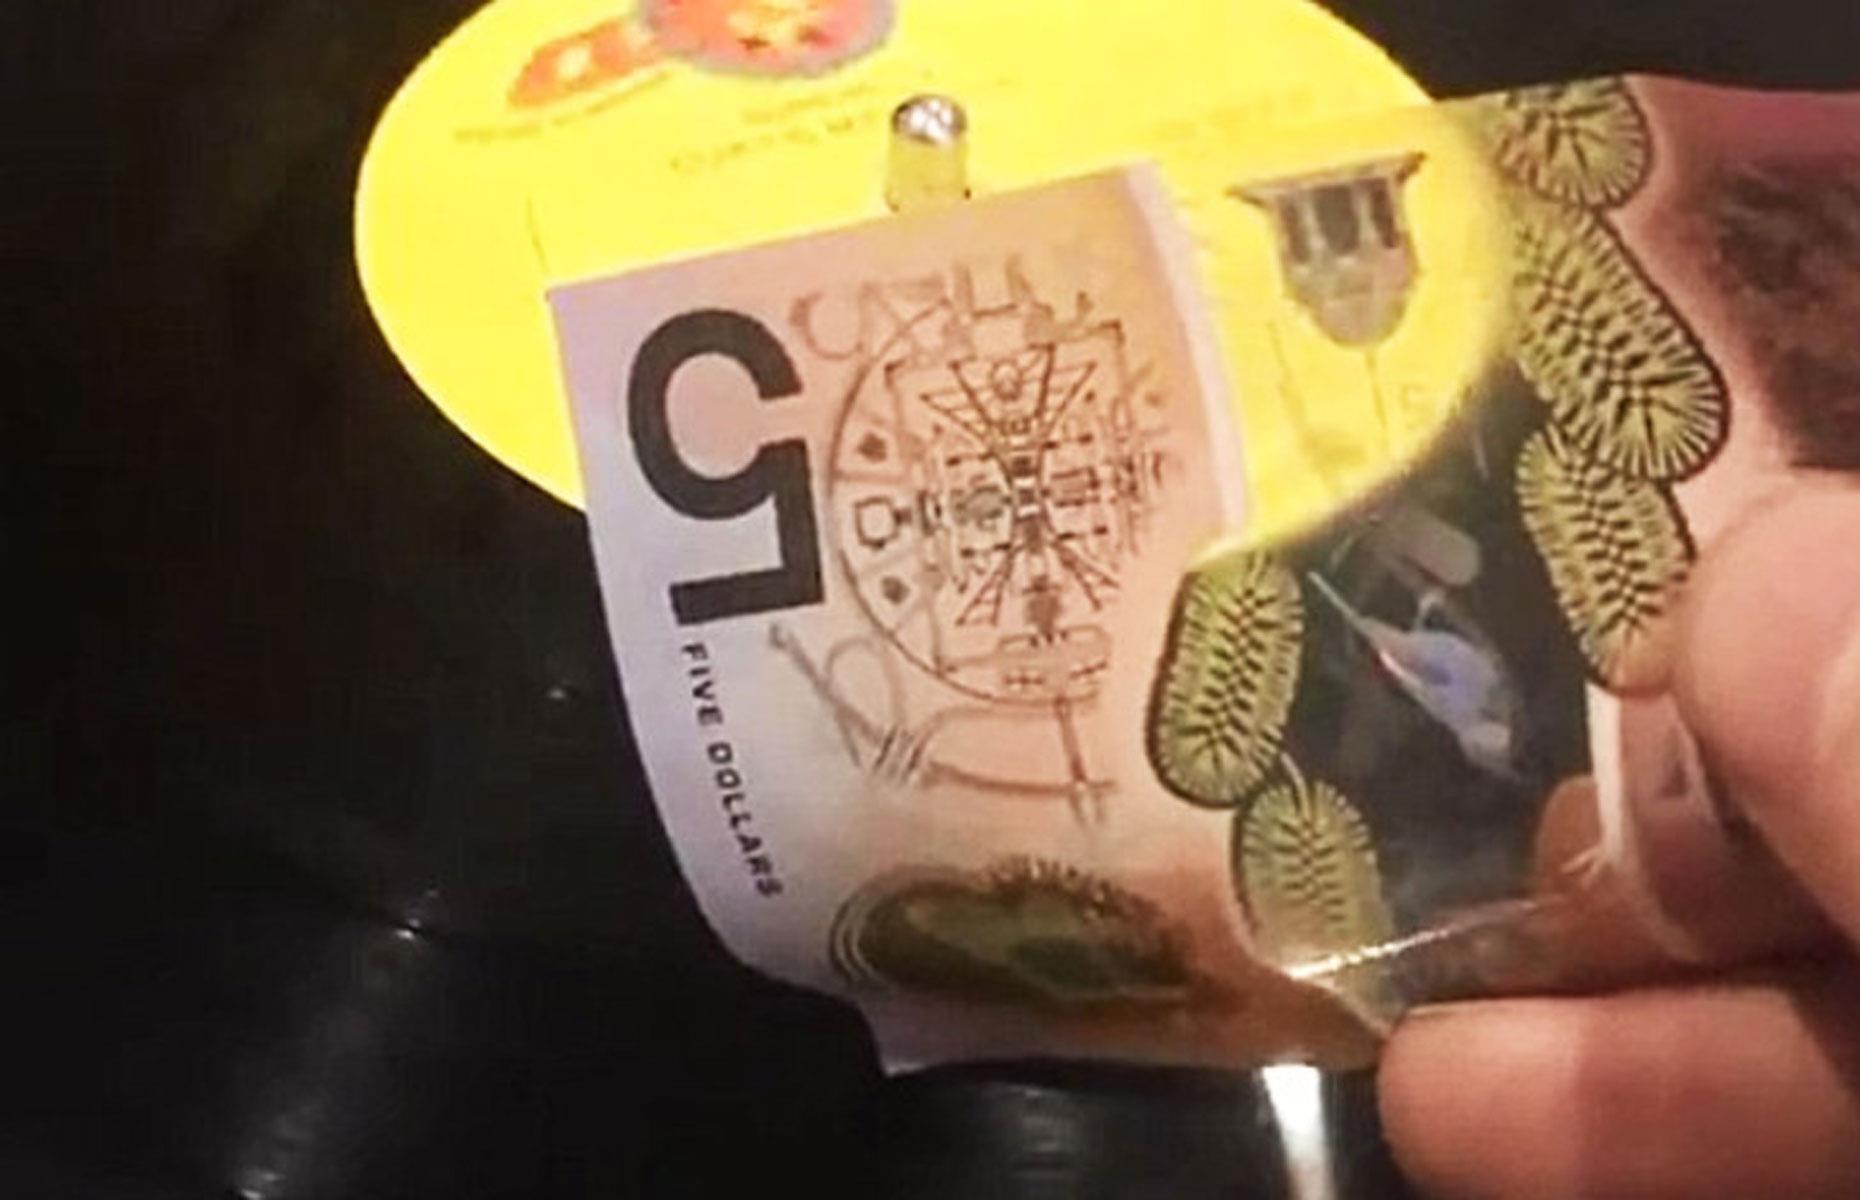 The new Australian $5 bill can also play your vinyl collection